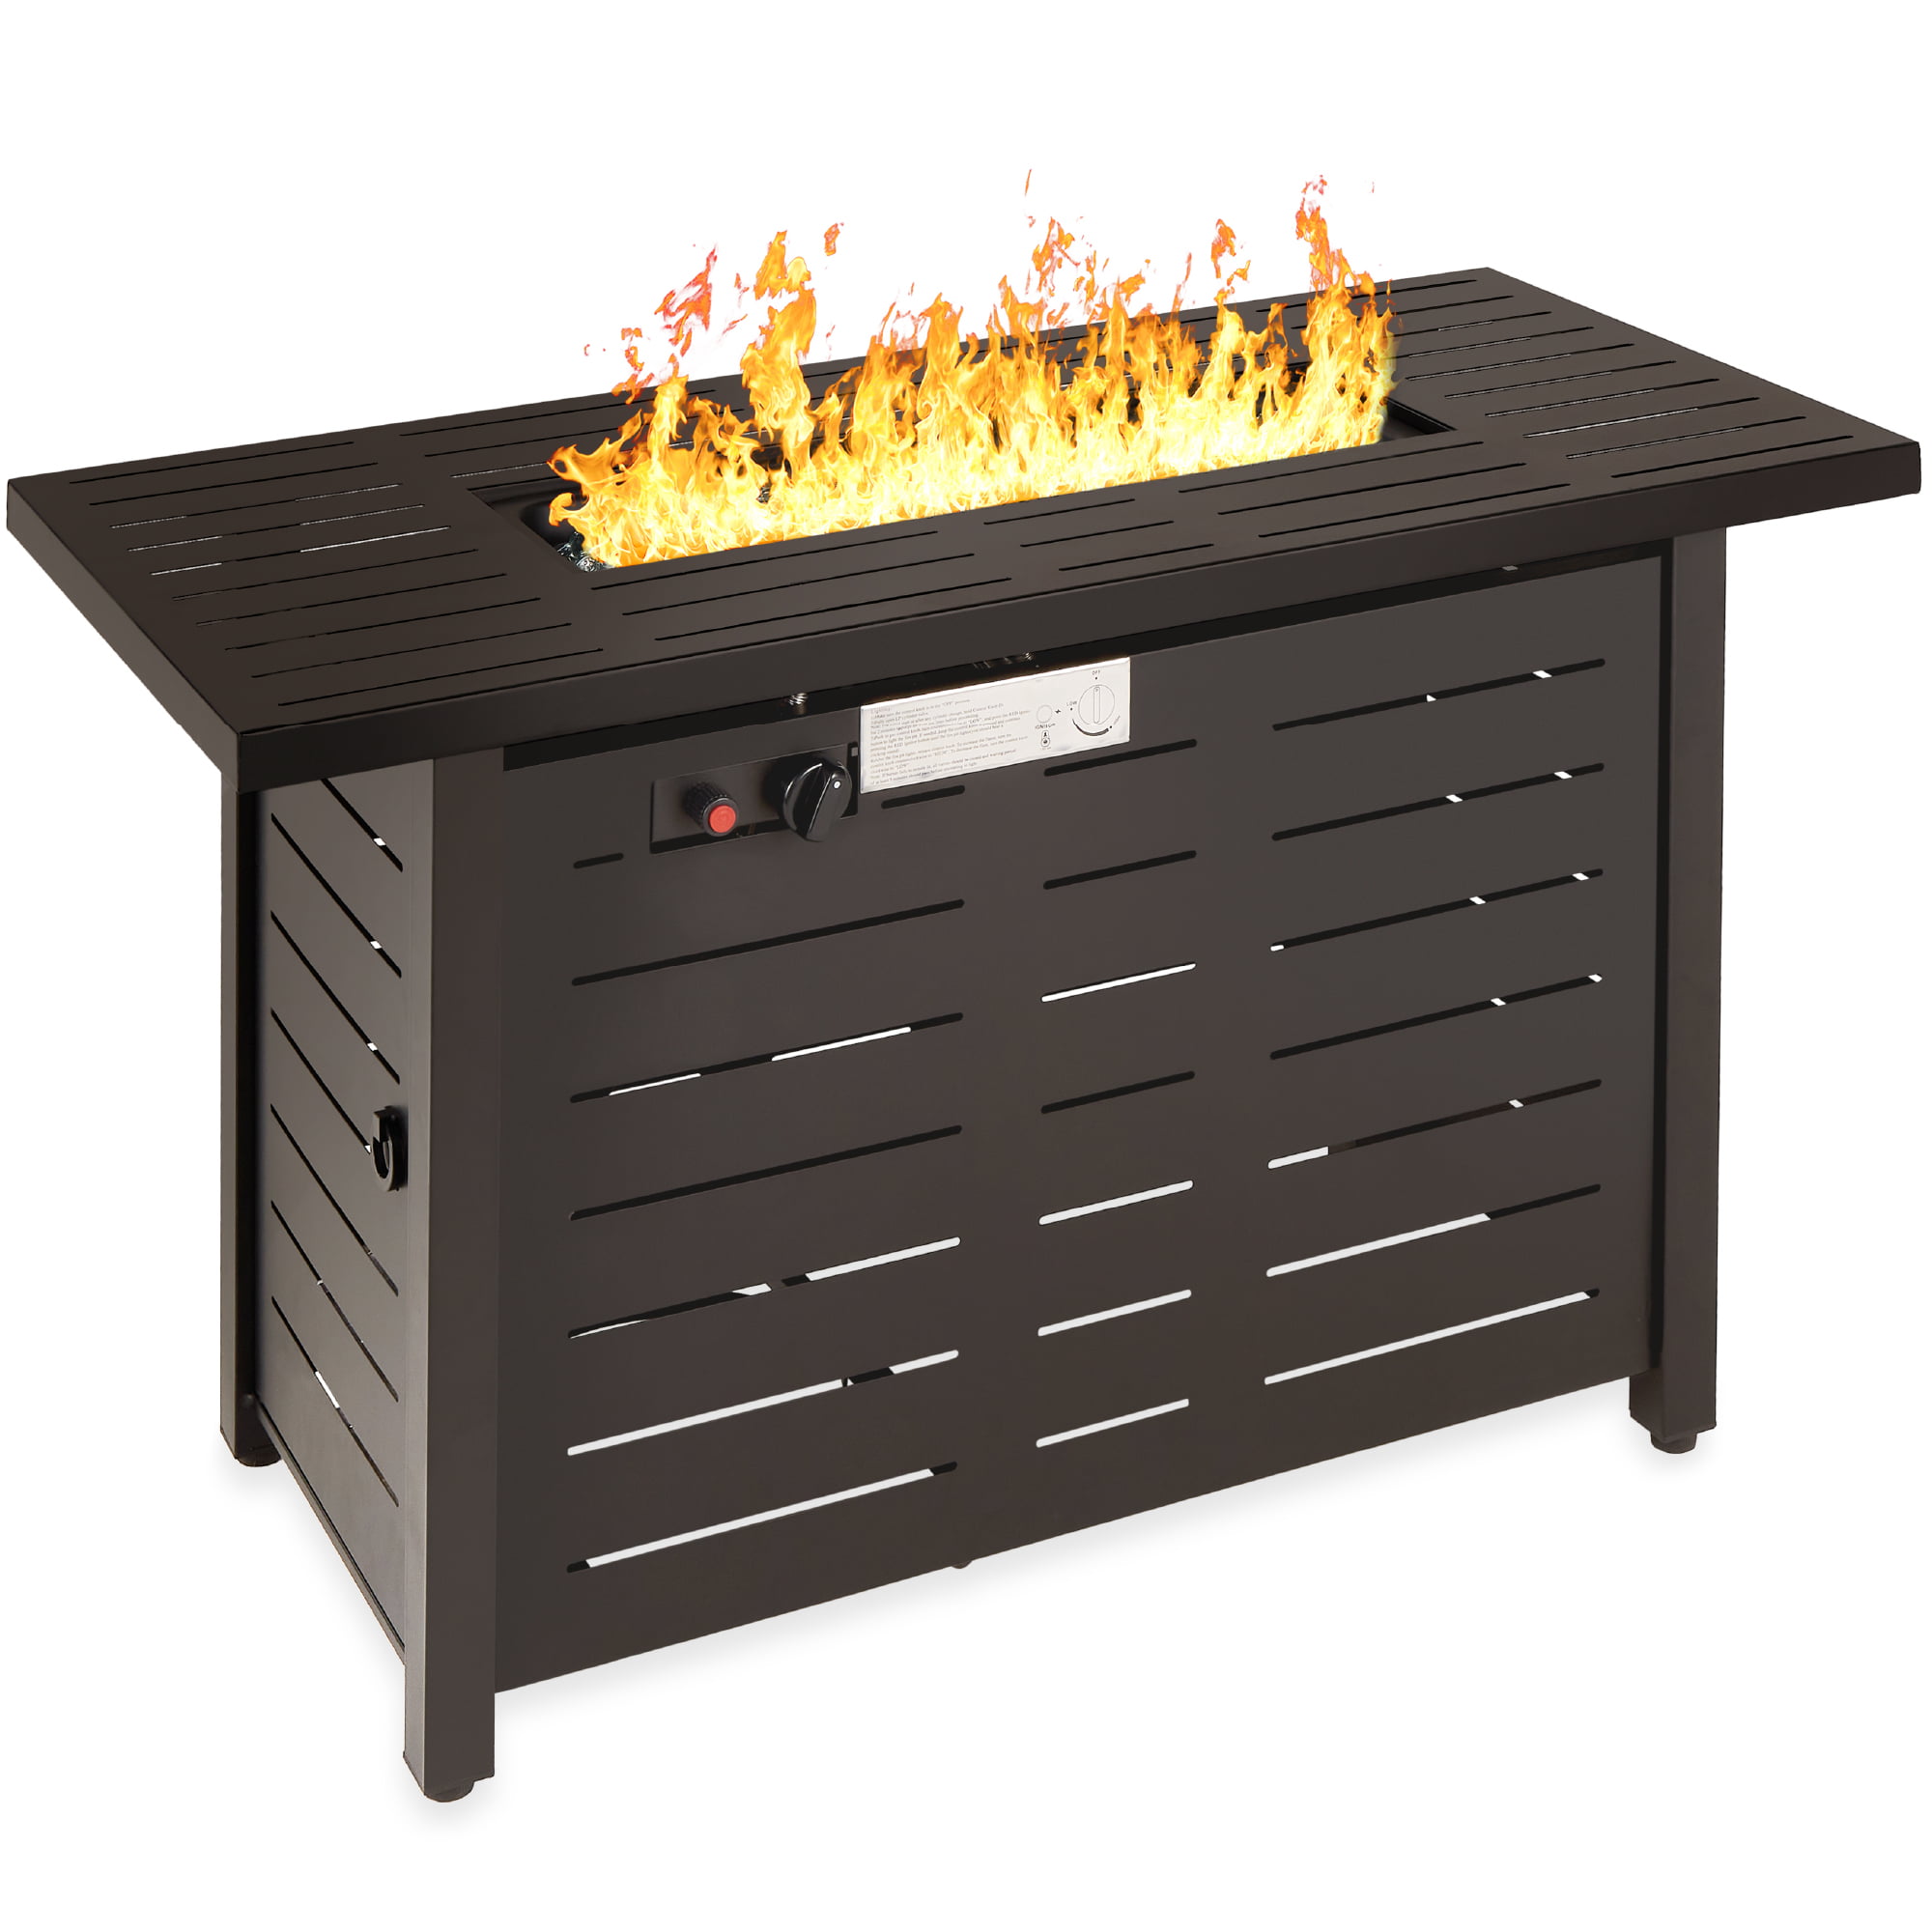 Fire Pit Table, Best Quality Fire Pit